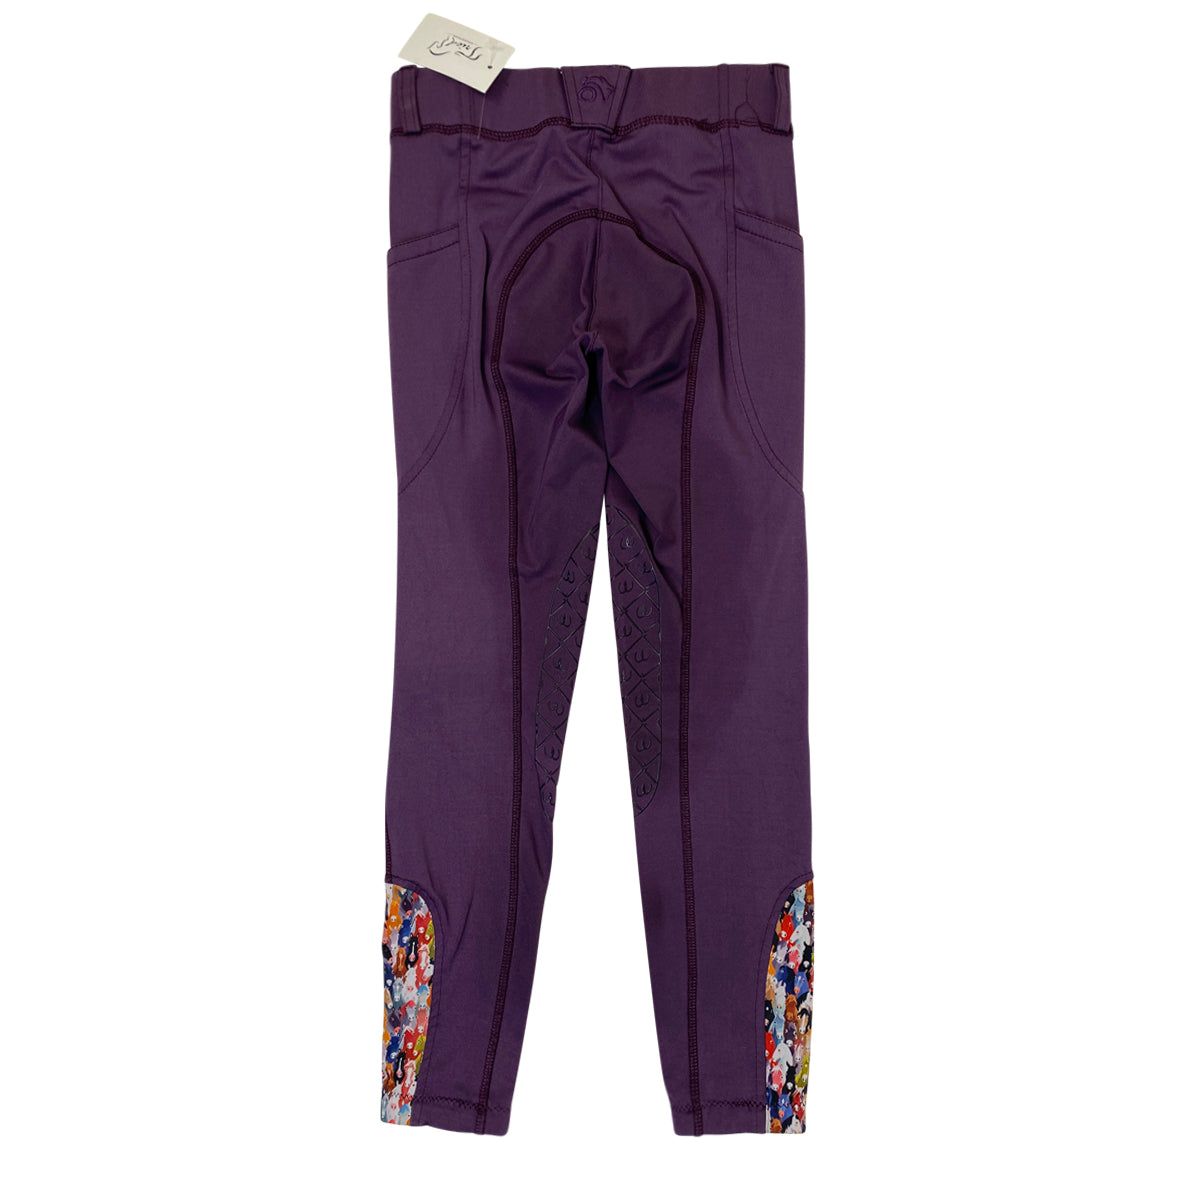 Back of Ovation AeroWick Kids Knee Patch Riding Tights in Violet